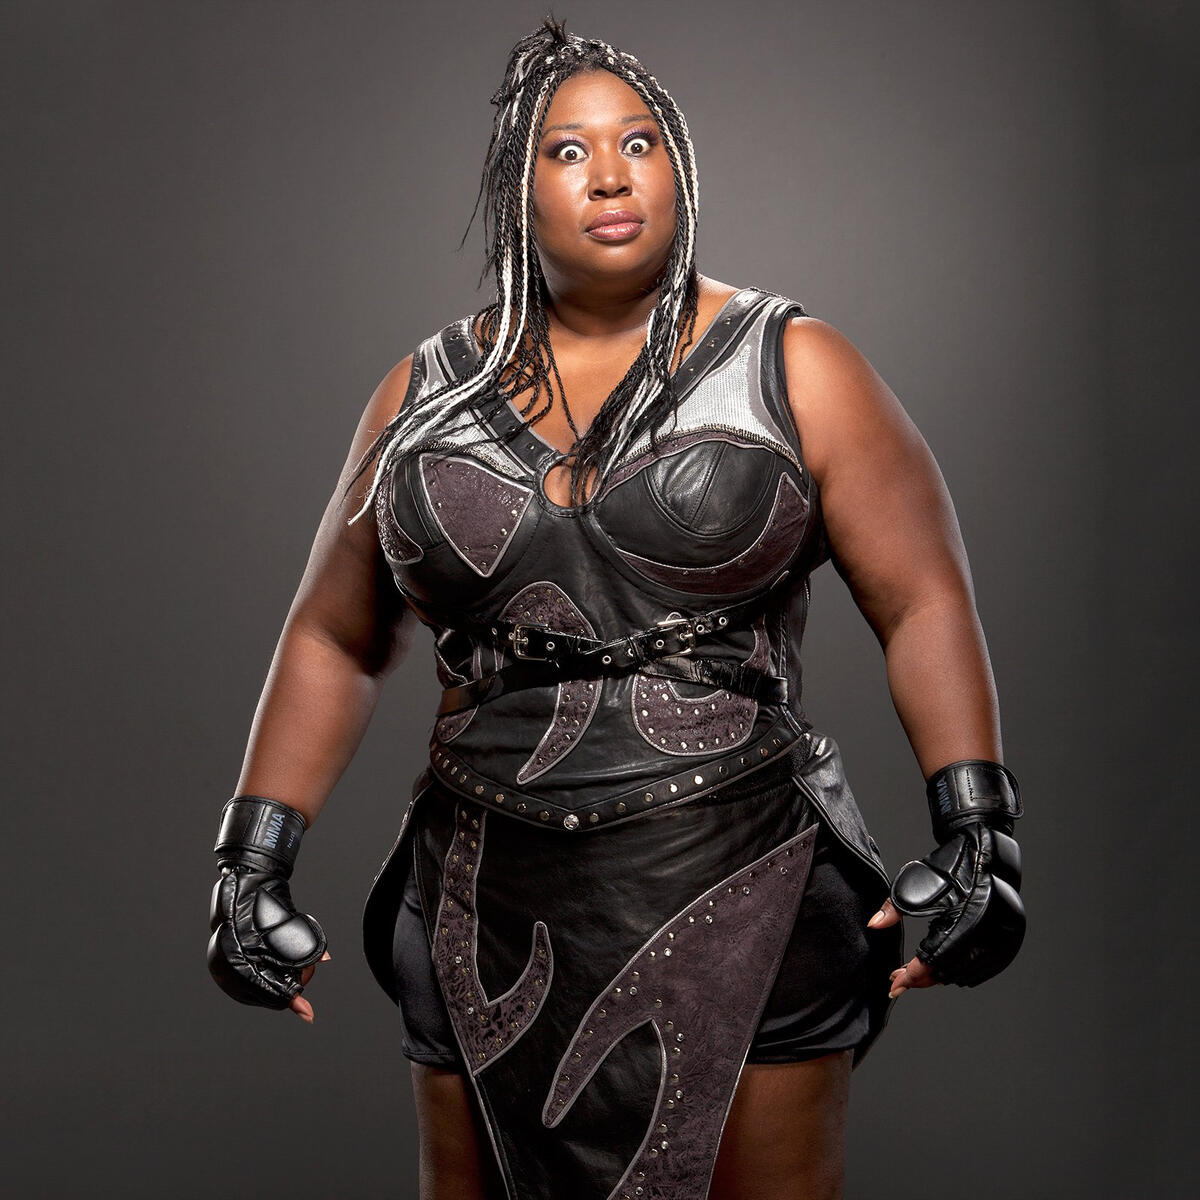 African American Women Of The Ring Photos Wwe